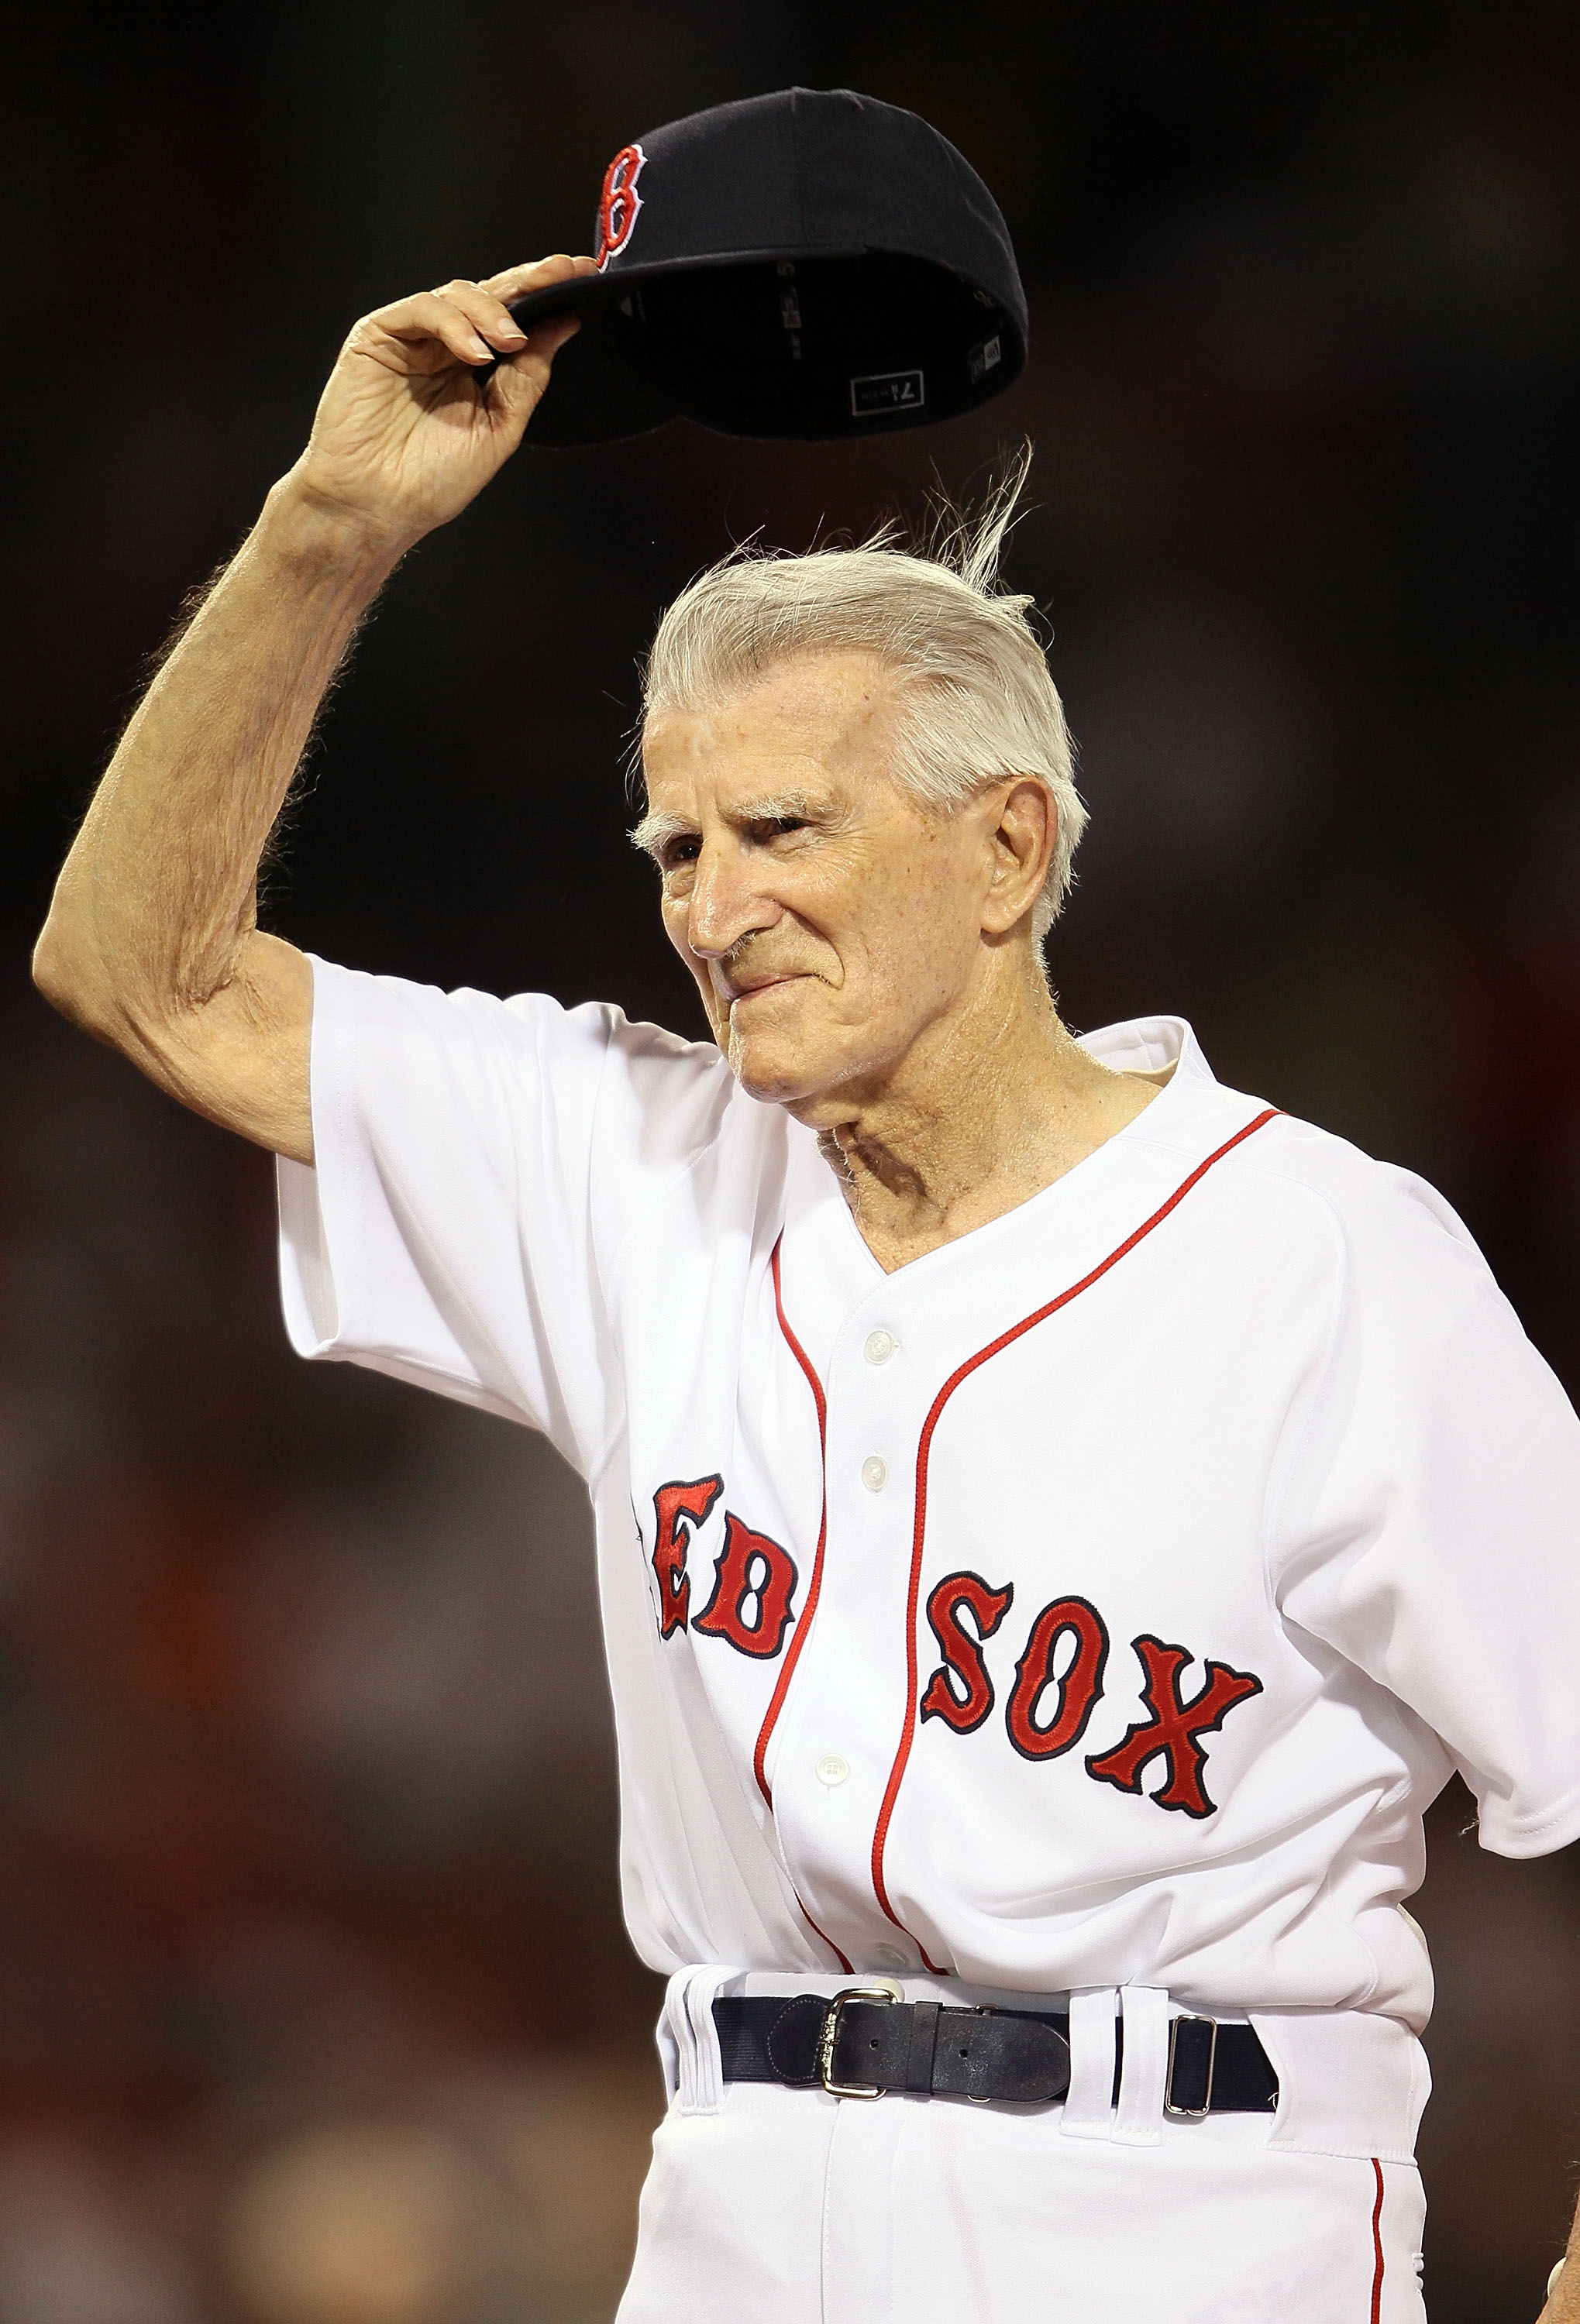 BOSTON - APRIL 04:  Boston Red Sox legend Johnny Pesky salutes the fans before the game against the New York Yankees on April 4, 2010 during Opening Night at Fenway Park in Boston, Massachusetts.  (Photo by Elsa/Getty Images)